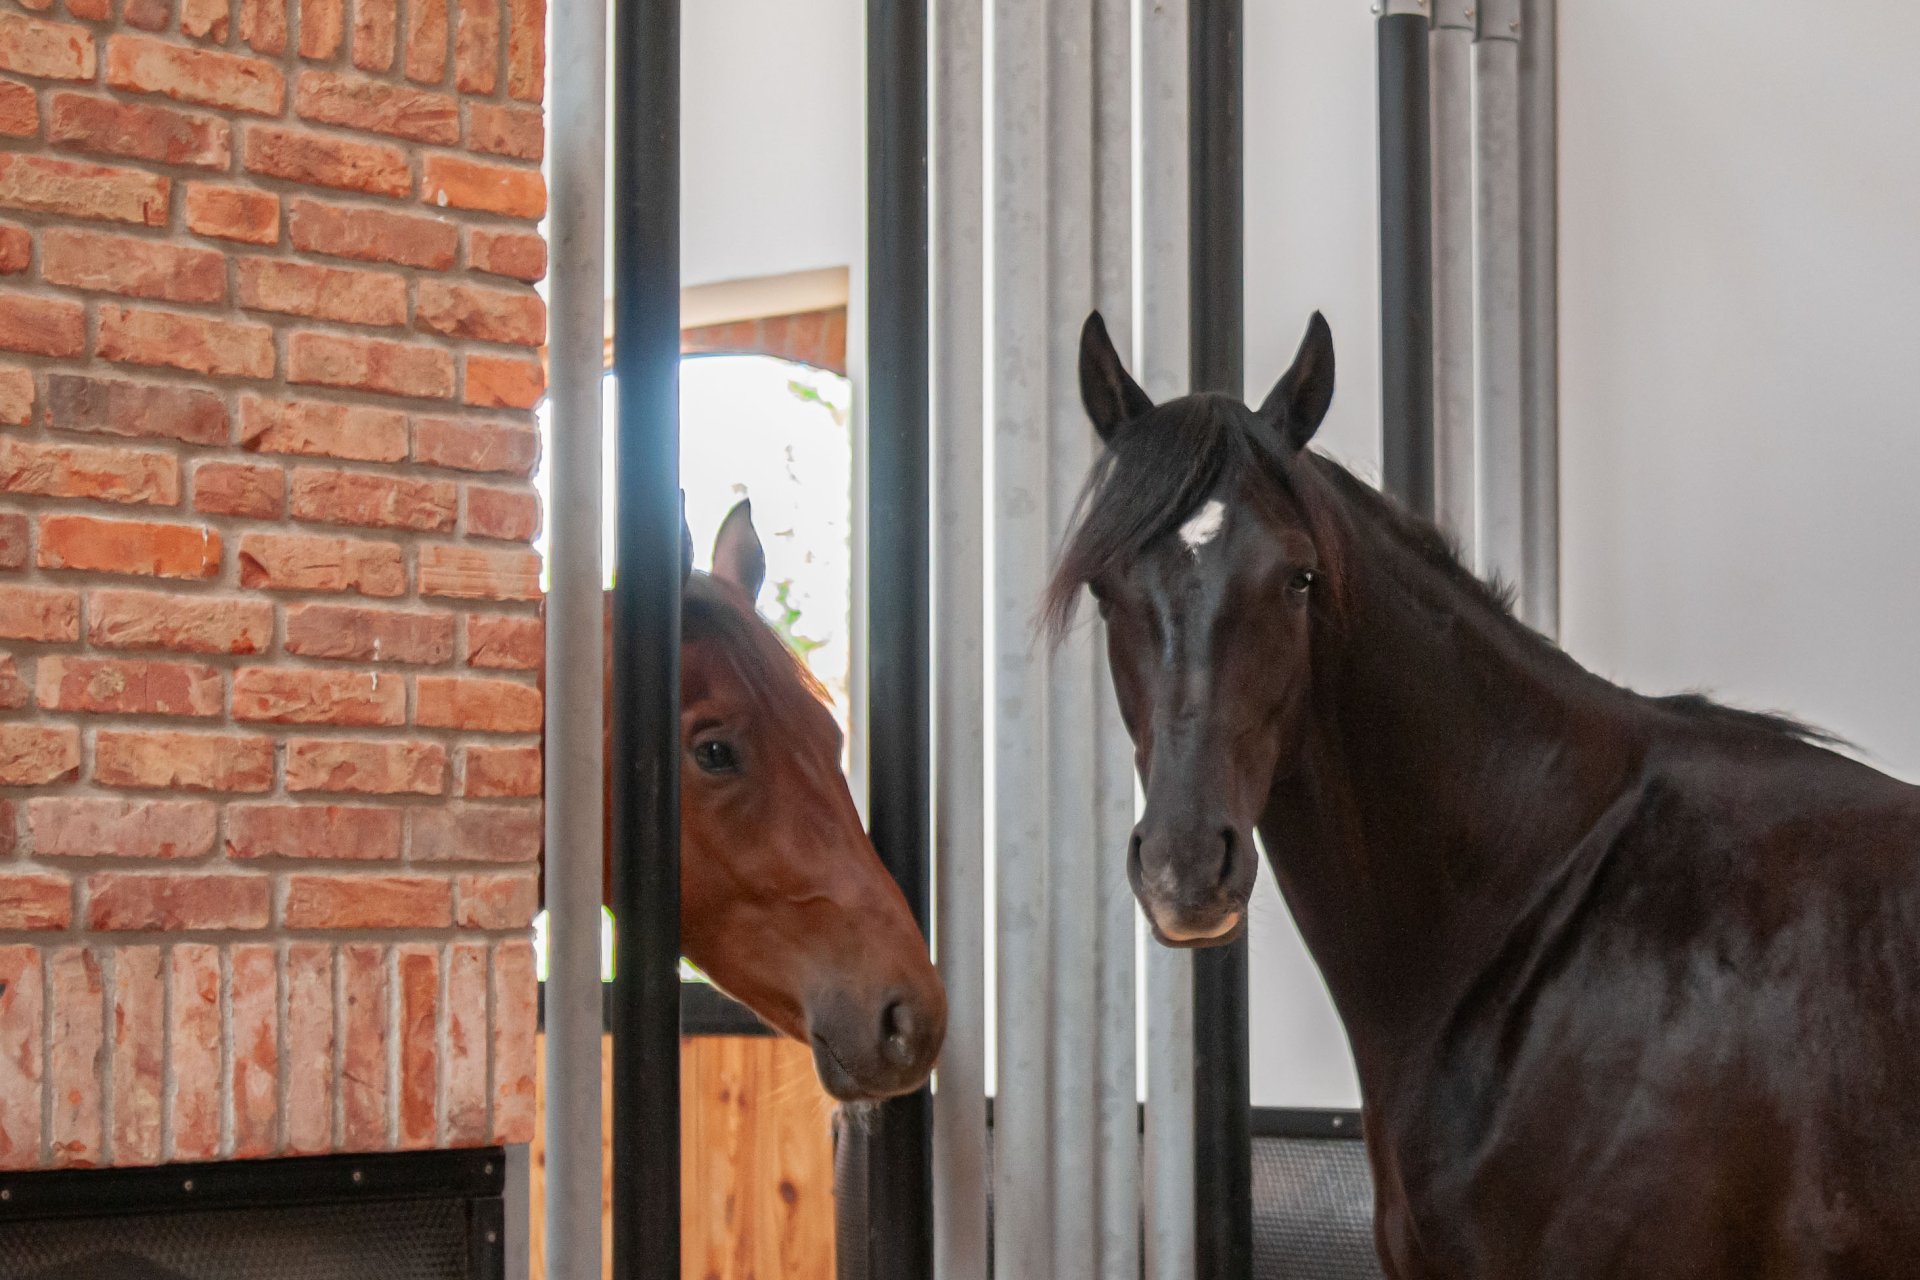 Two stallions in the horse box interacting with each other through the social fence